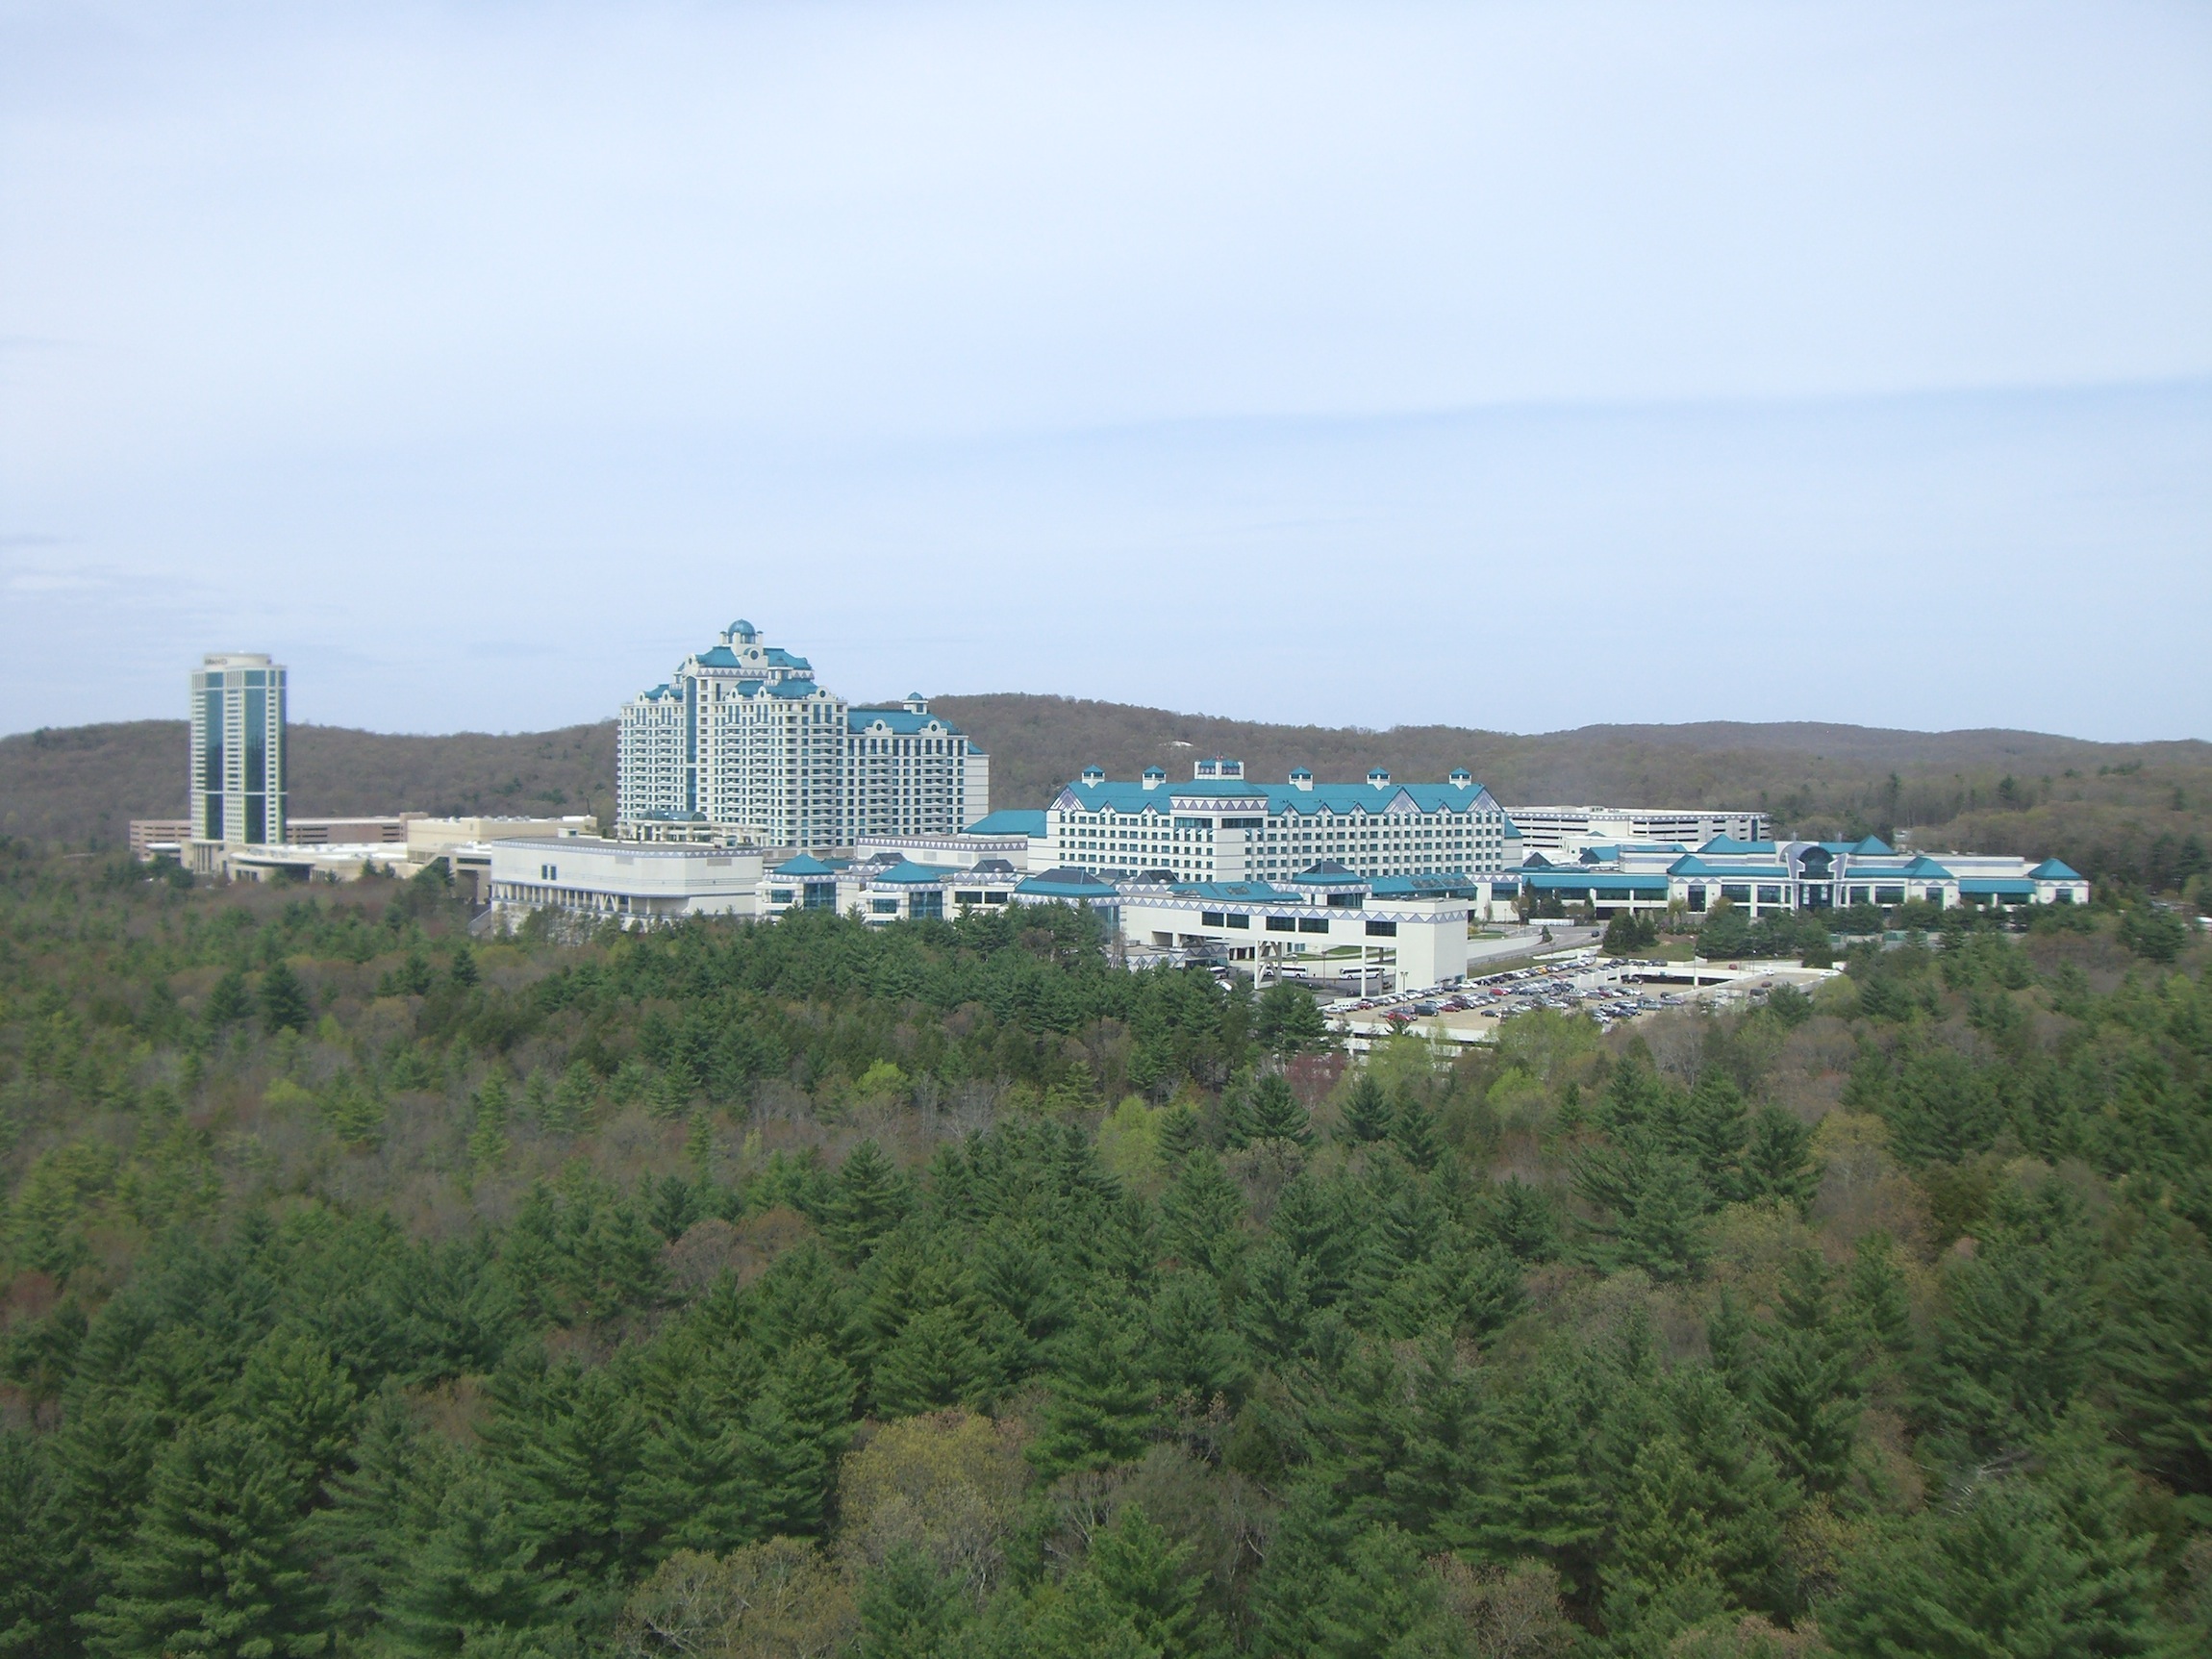 Gamblers who sued Mashantucket Tribe for $3M lose lawsuit